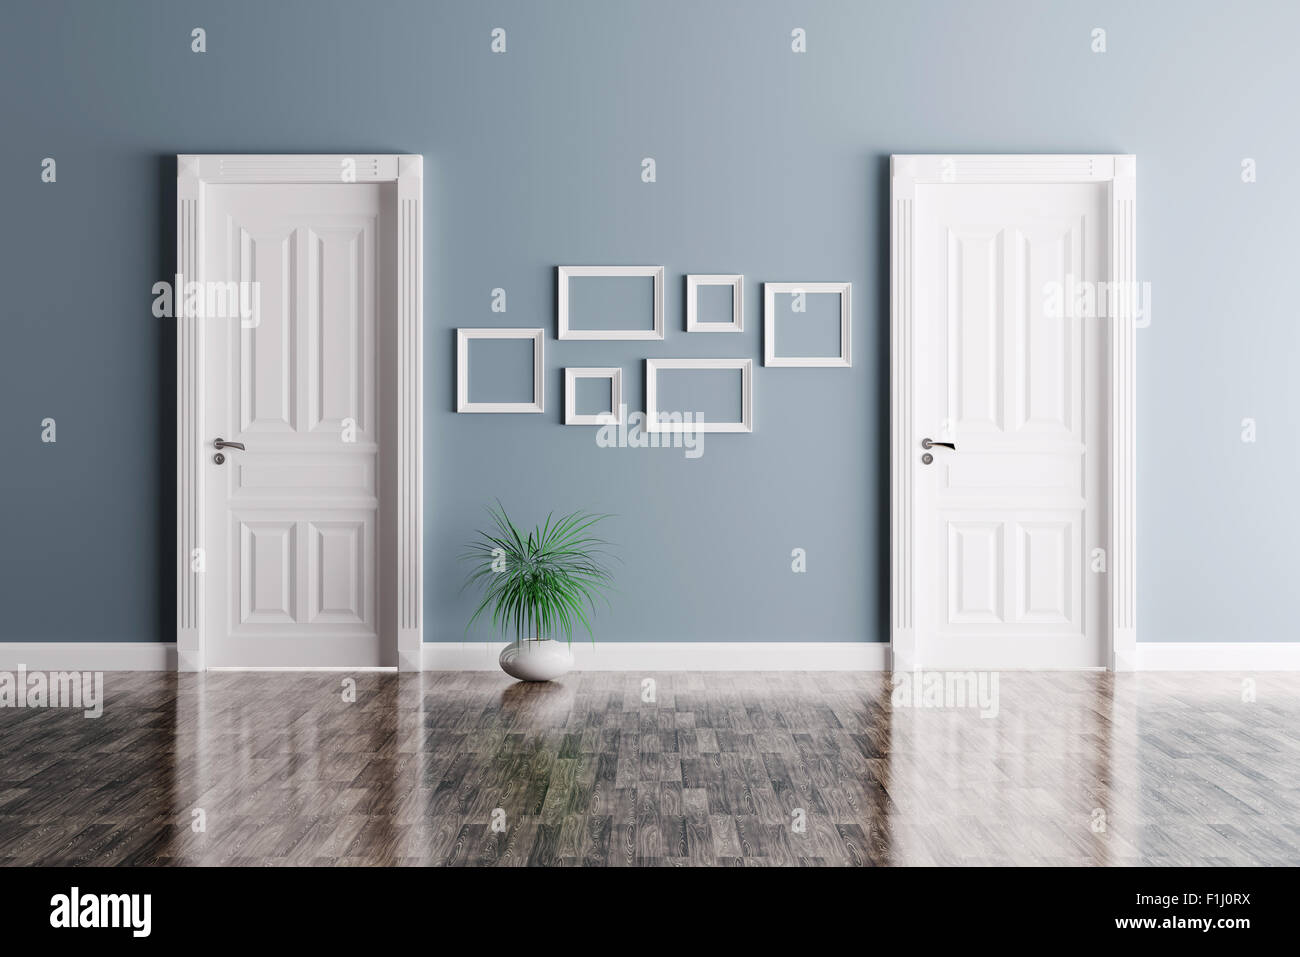 Interior of a room with two classic doors and frames Stock Photo